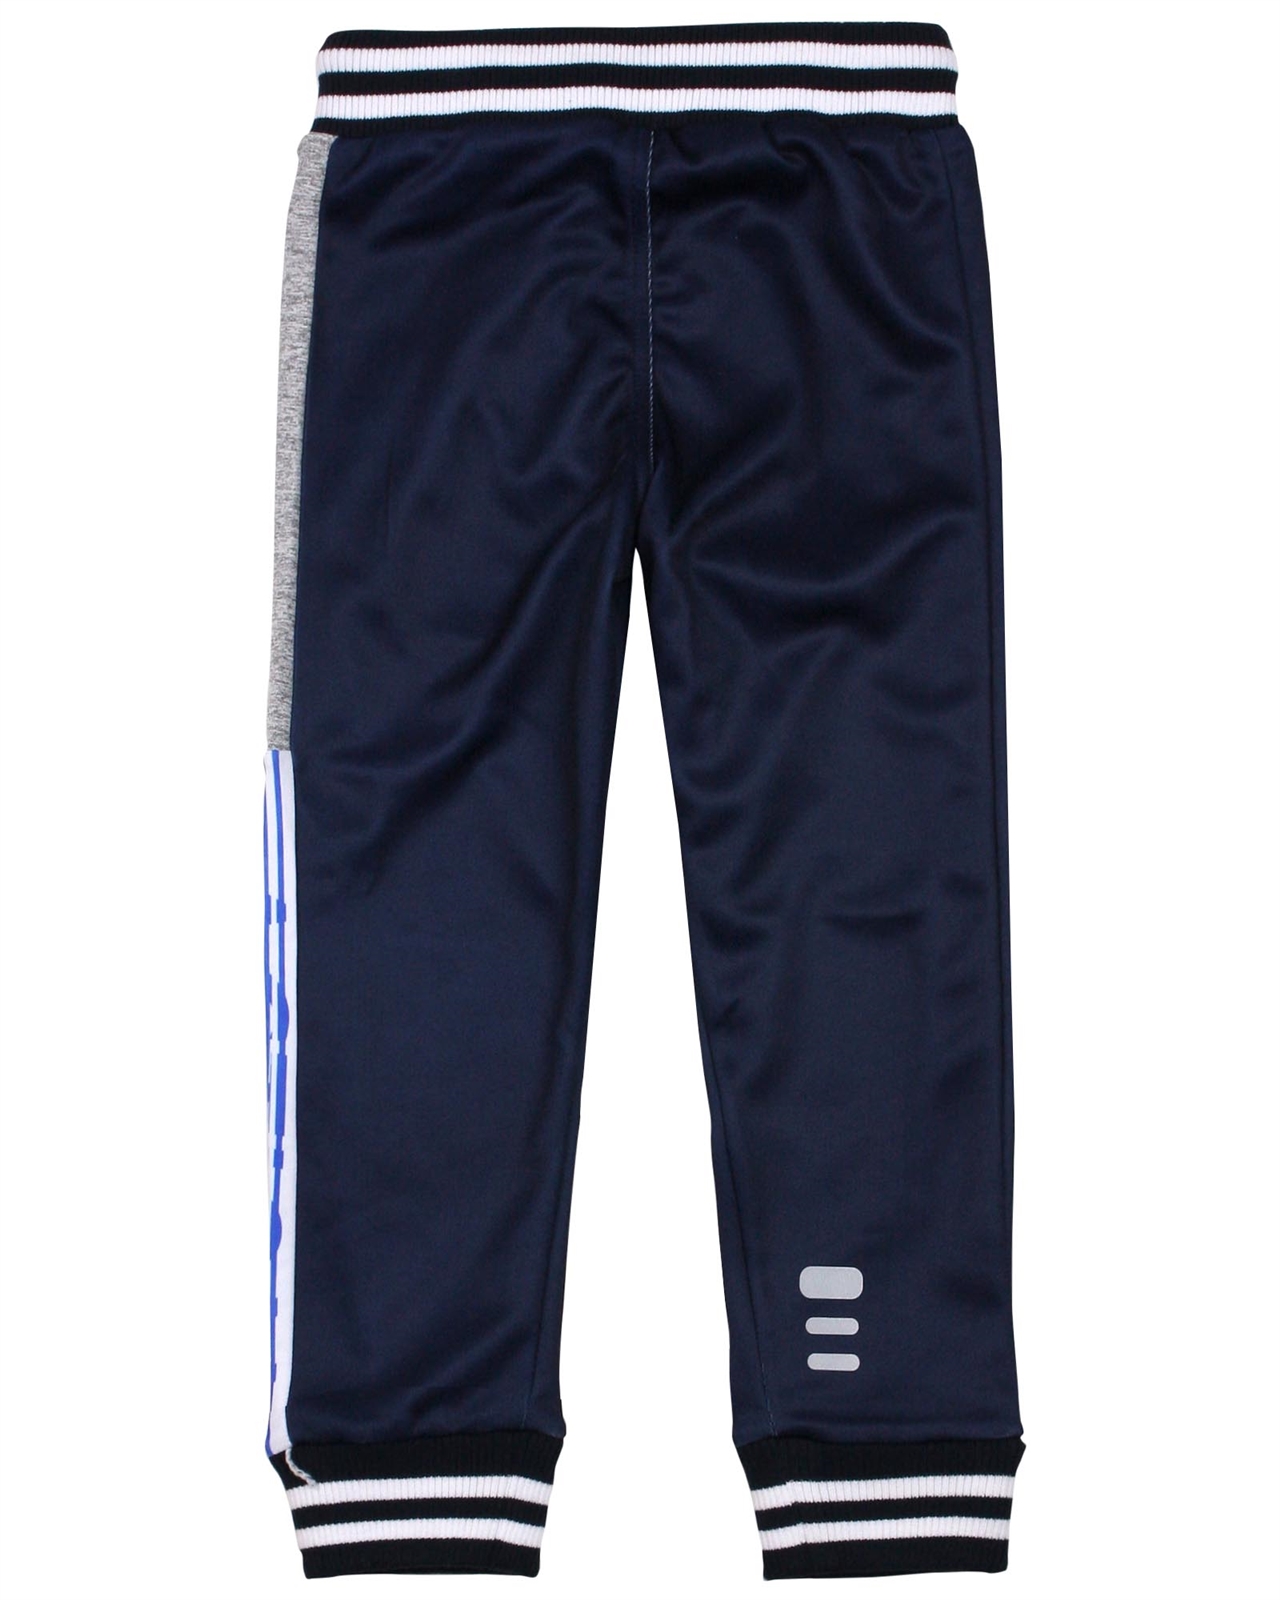 NANO Boys' Athletic Pants with side Inserts, Sizes 2-12